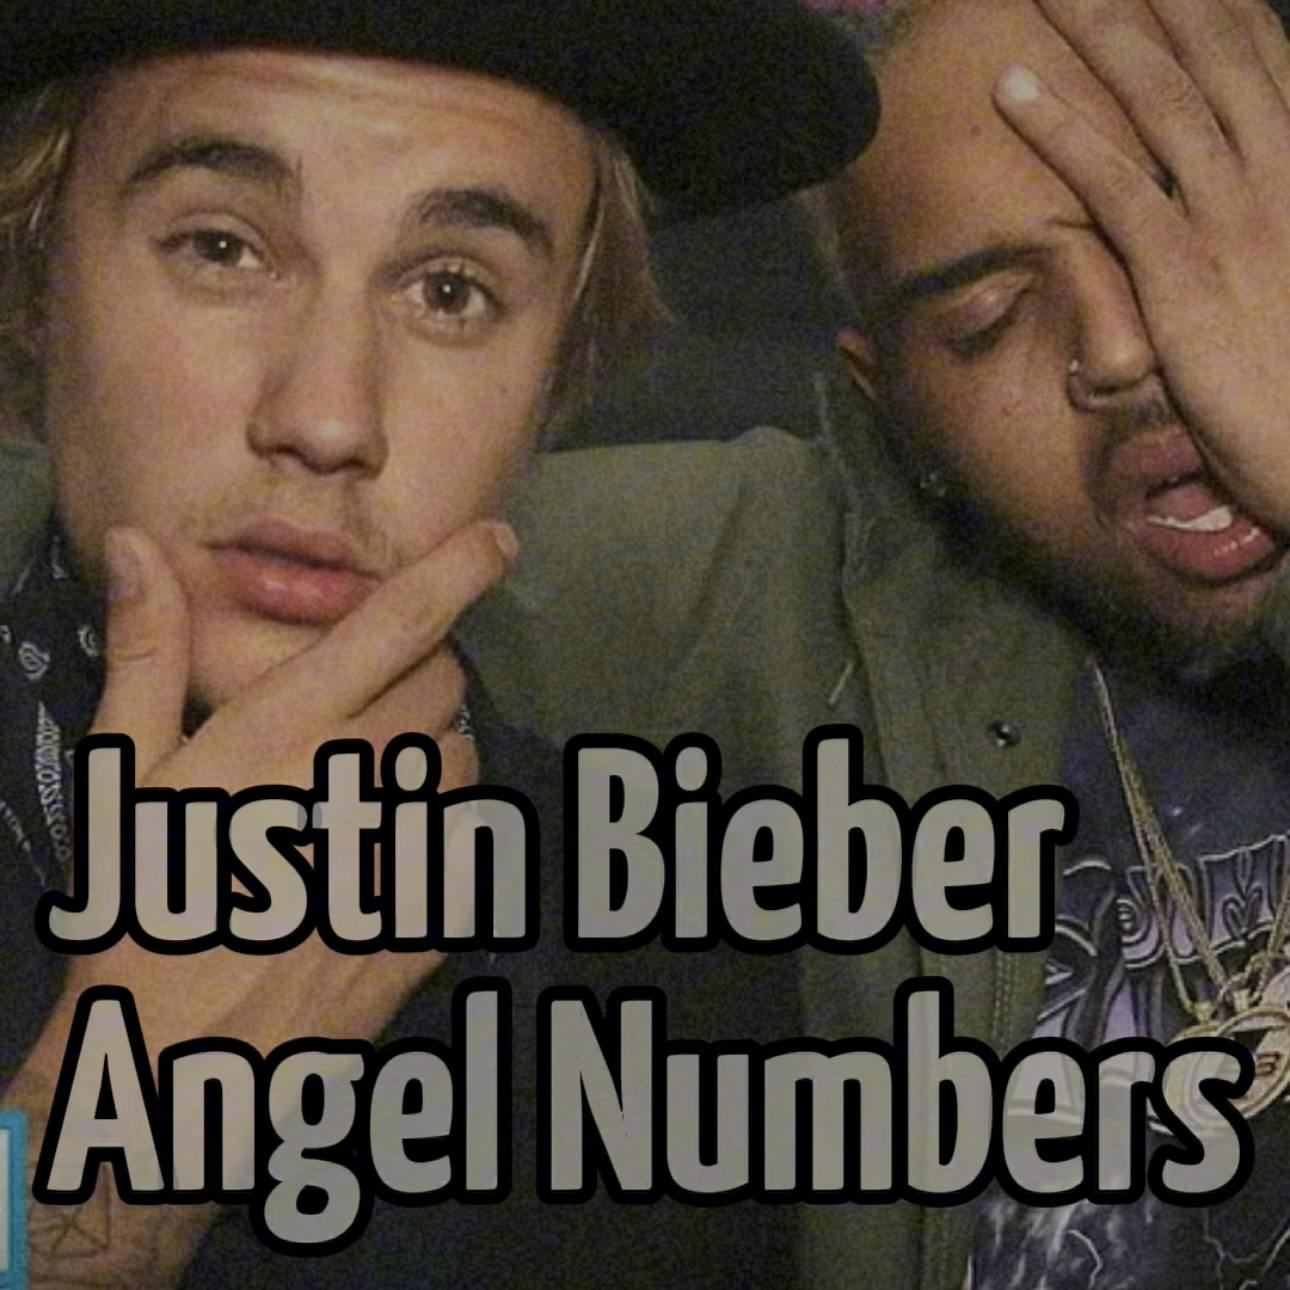 Justin Bieber - Angel Numbers (feat. Chris Brown) (AI Song)